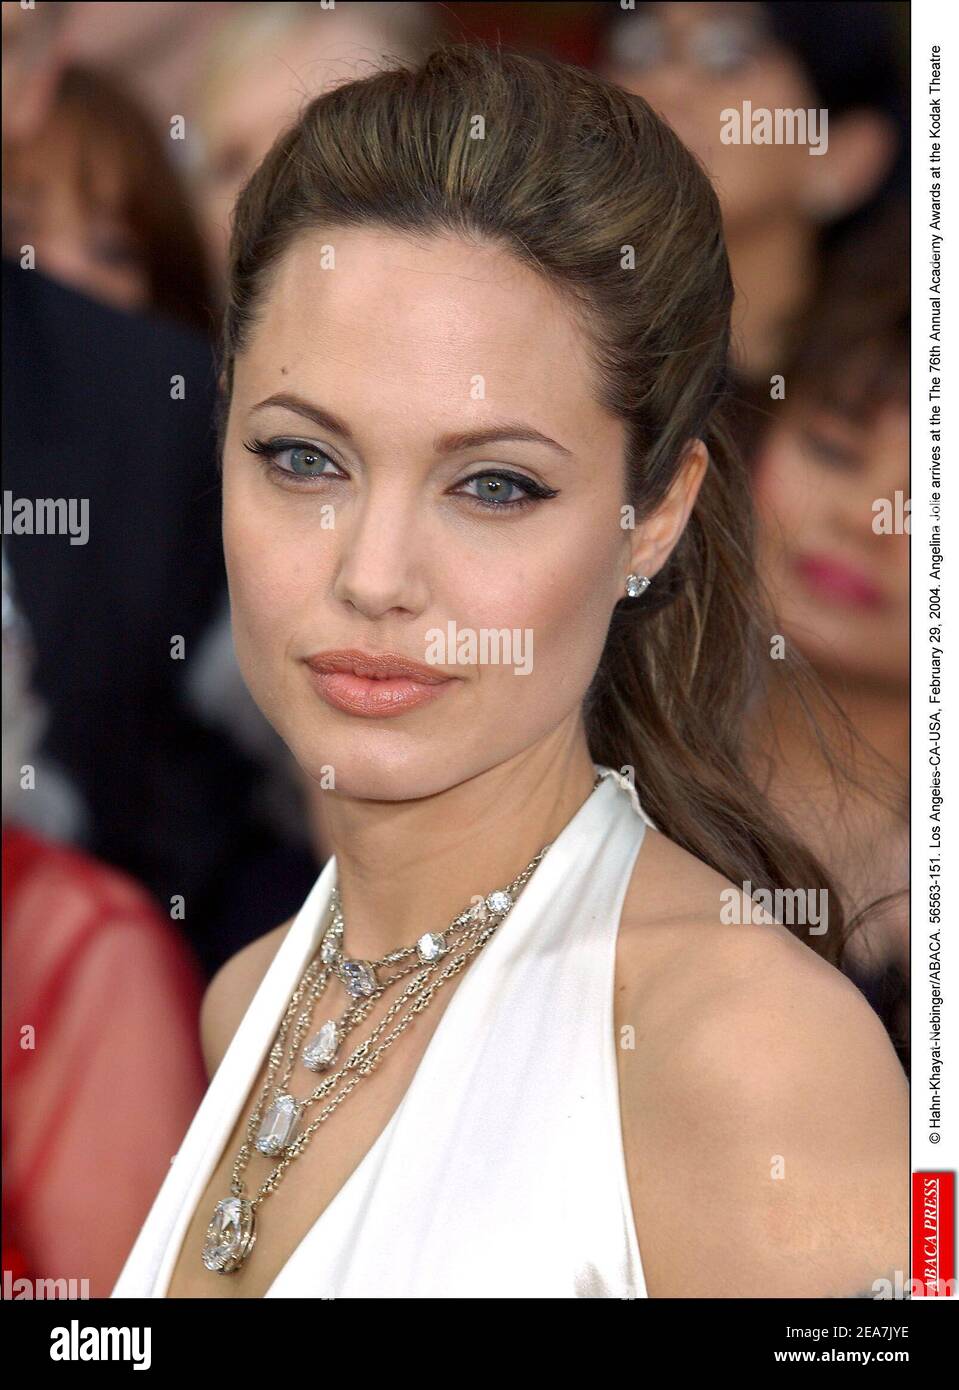 Angelina Jolie arrives at the The 76th Annual Academy Awards on Sunday, February 29th, 2004 at the Kodak Theatre in Los Angeles-CA. (Pictured: Angelina Jolie) Photo by Hahn-Khayat-Nebinger/ABACA Stock Photo